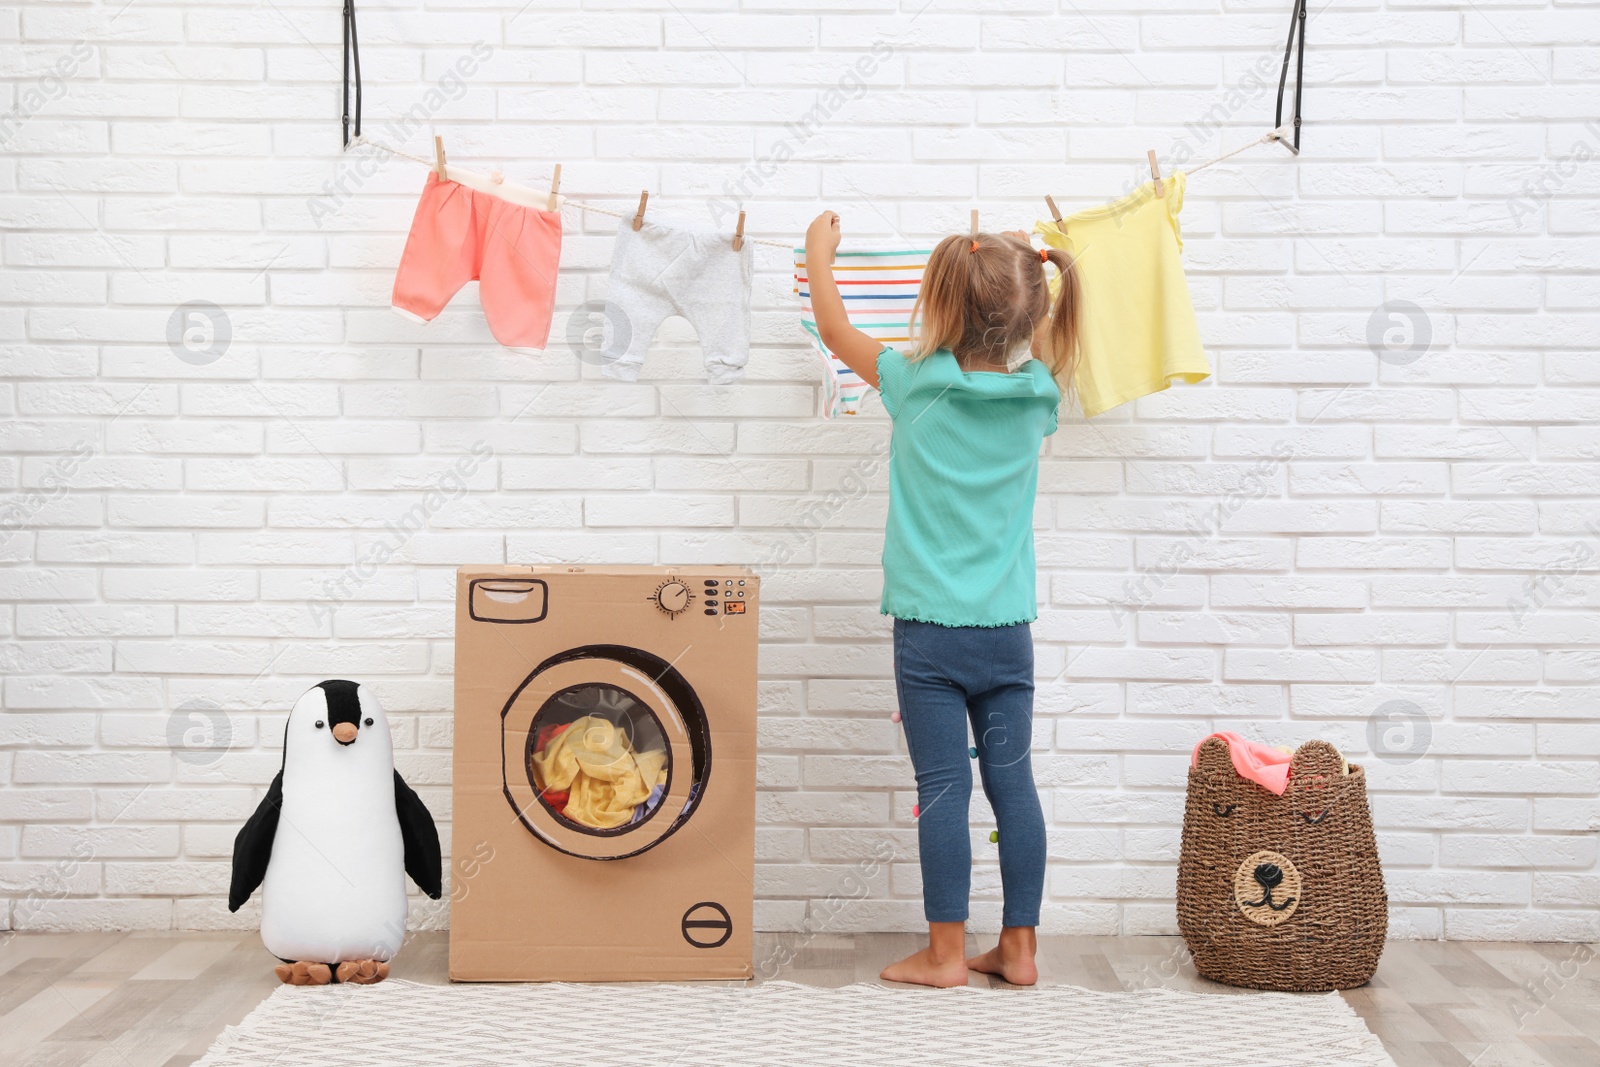 Photo of Little girl hanging clean laundry near toy cardboard washing machine indoors